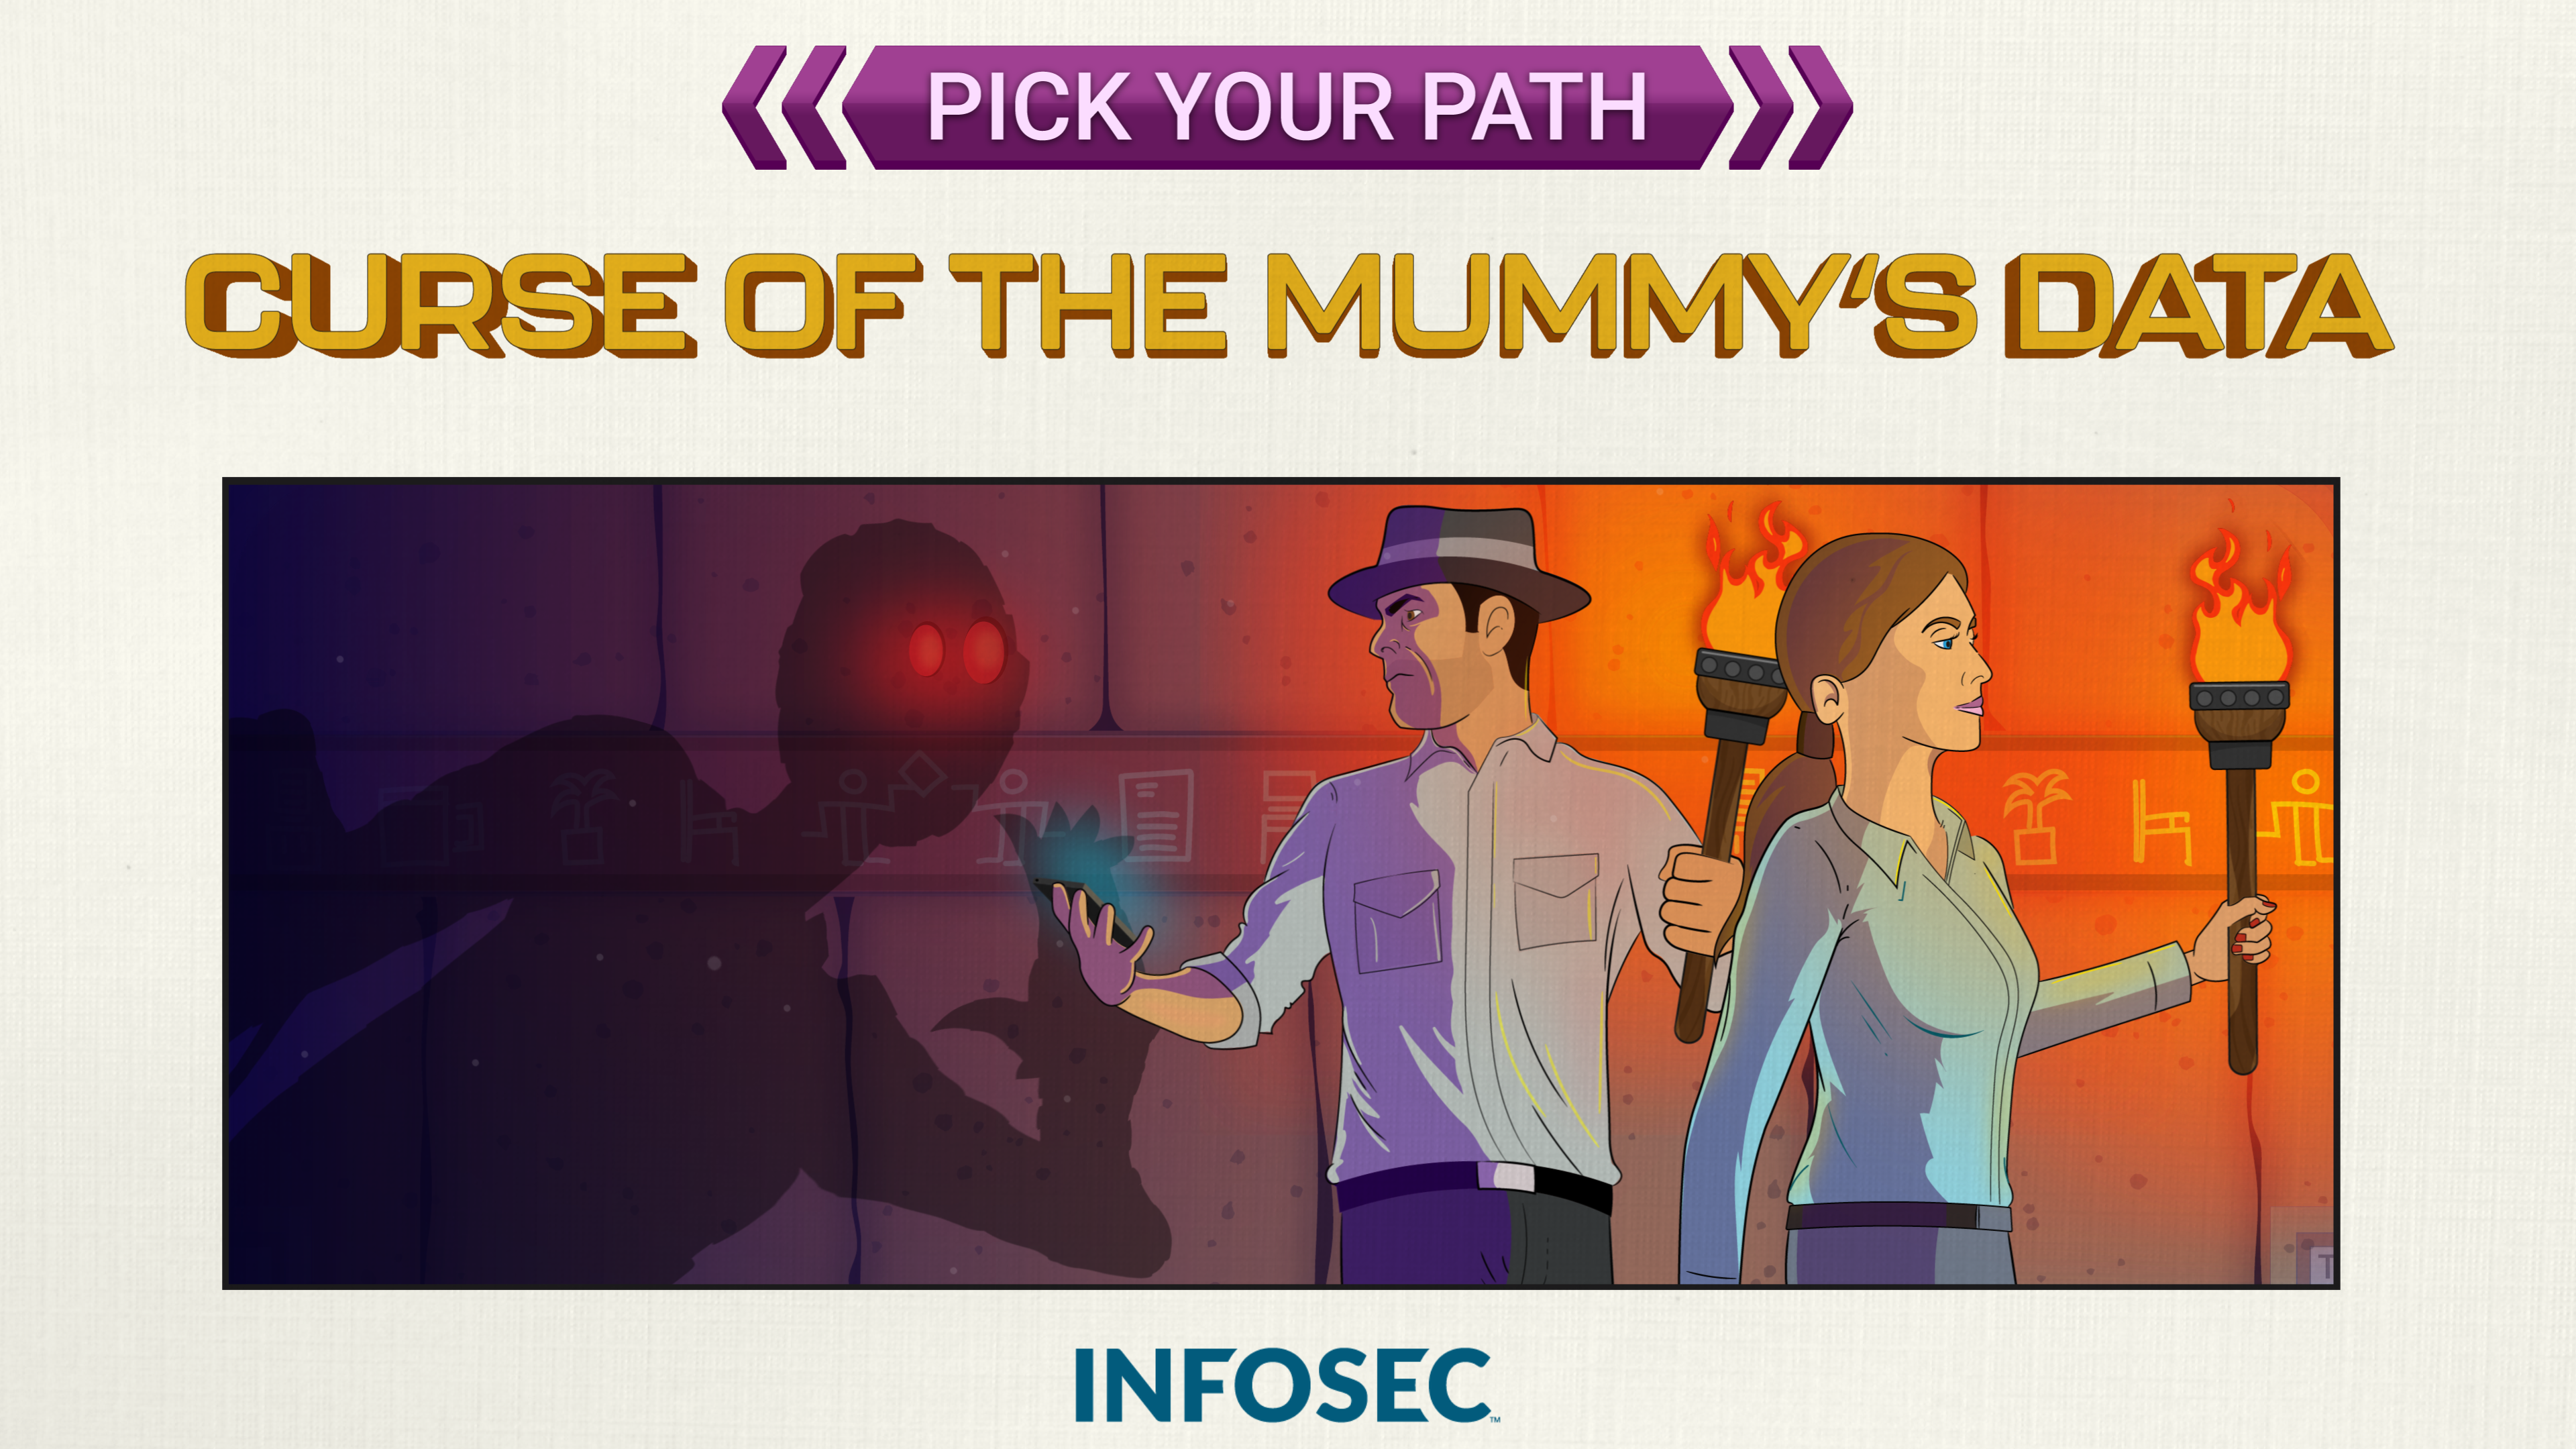 Pick Your Path: Curse of the Mummy's Data